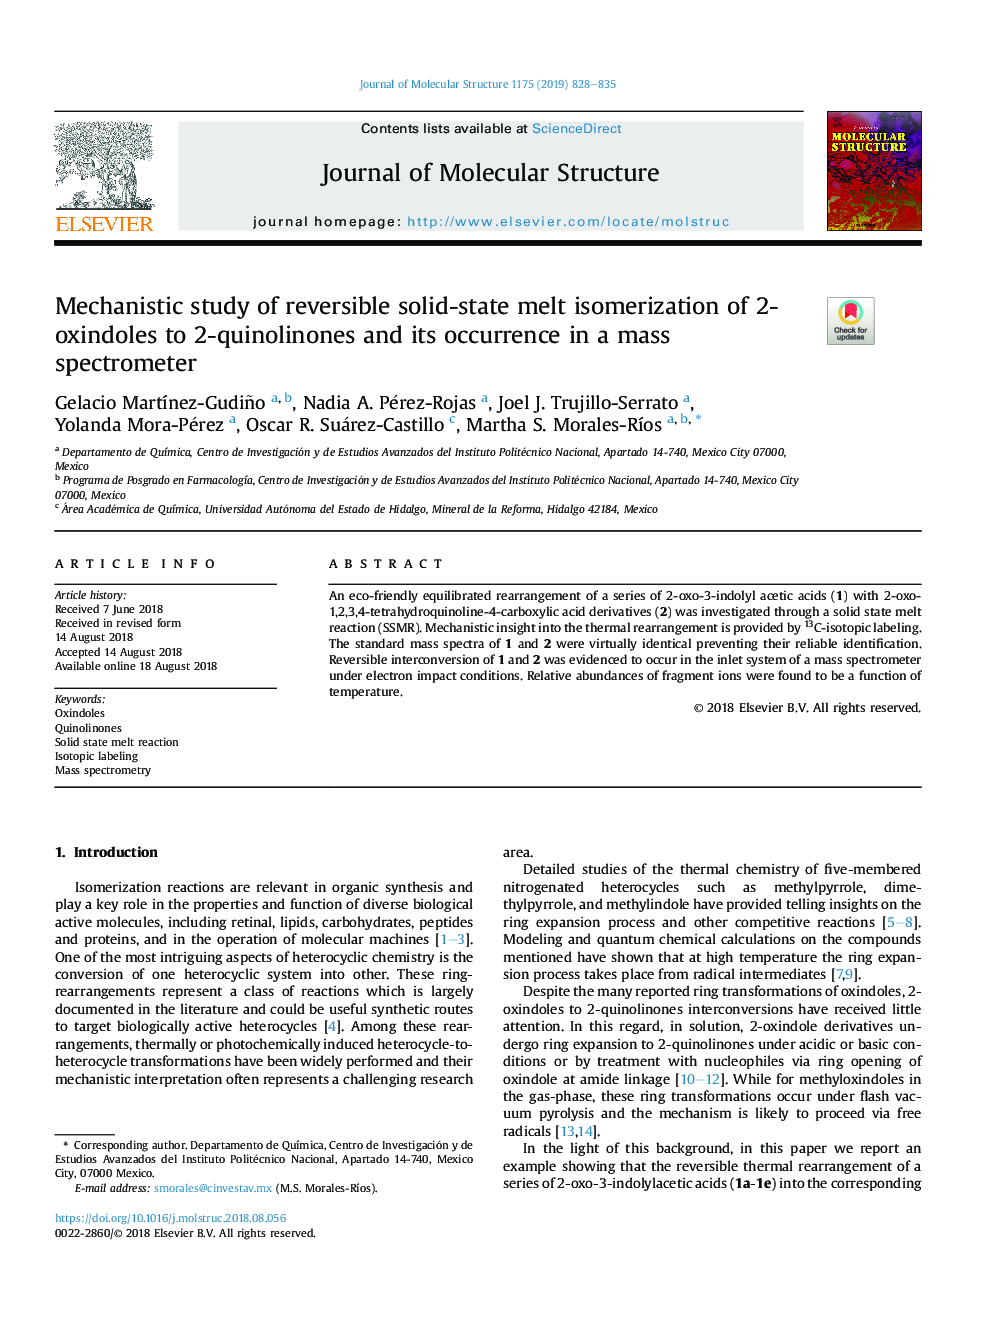 Mechanistic study of reversible solid-state melt isomerization of 2-oxindoles to 2-quinolinones and its occurrence in a mass spectrometer